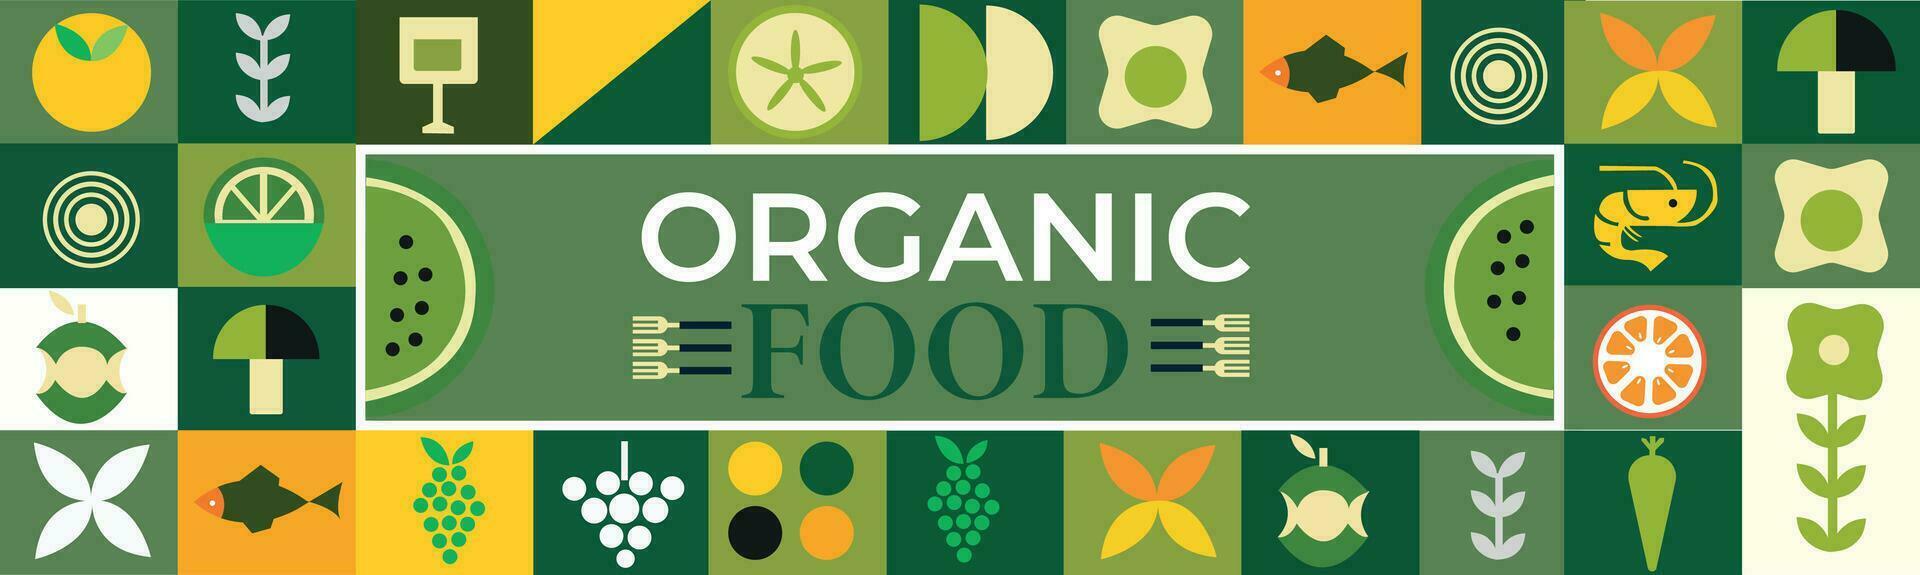 Organic food banner in flat style. Fruits and cereals Abstract geometric retro shapes .Great for flyer, web poster, natural products presentation templates, cover design. vector